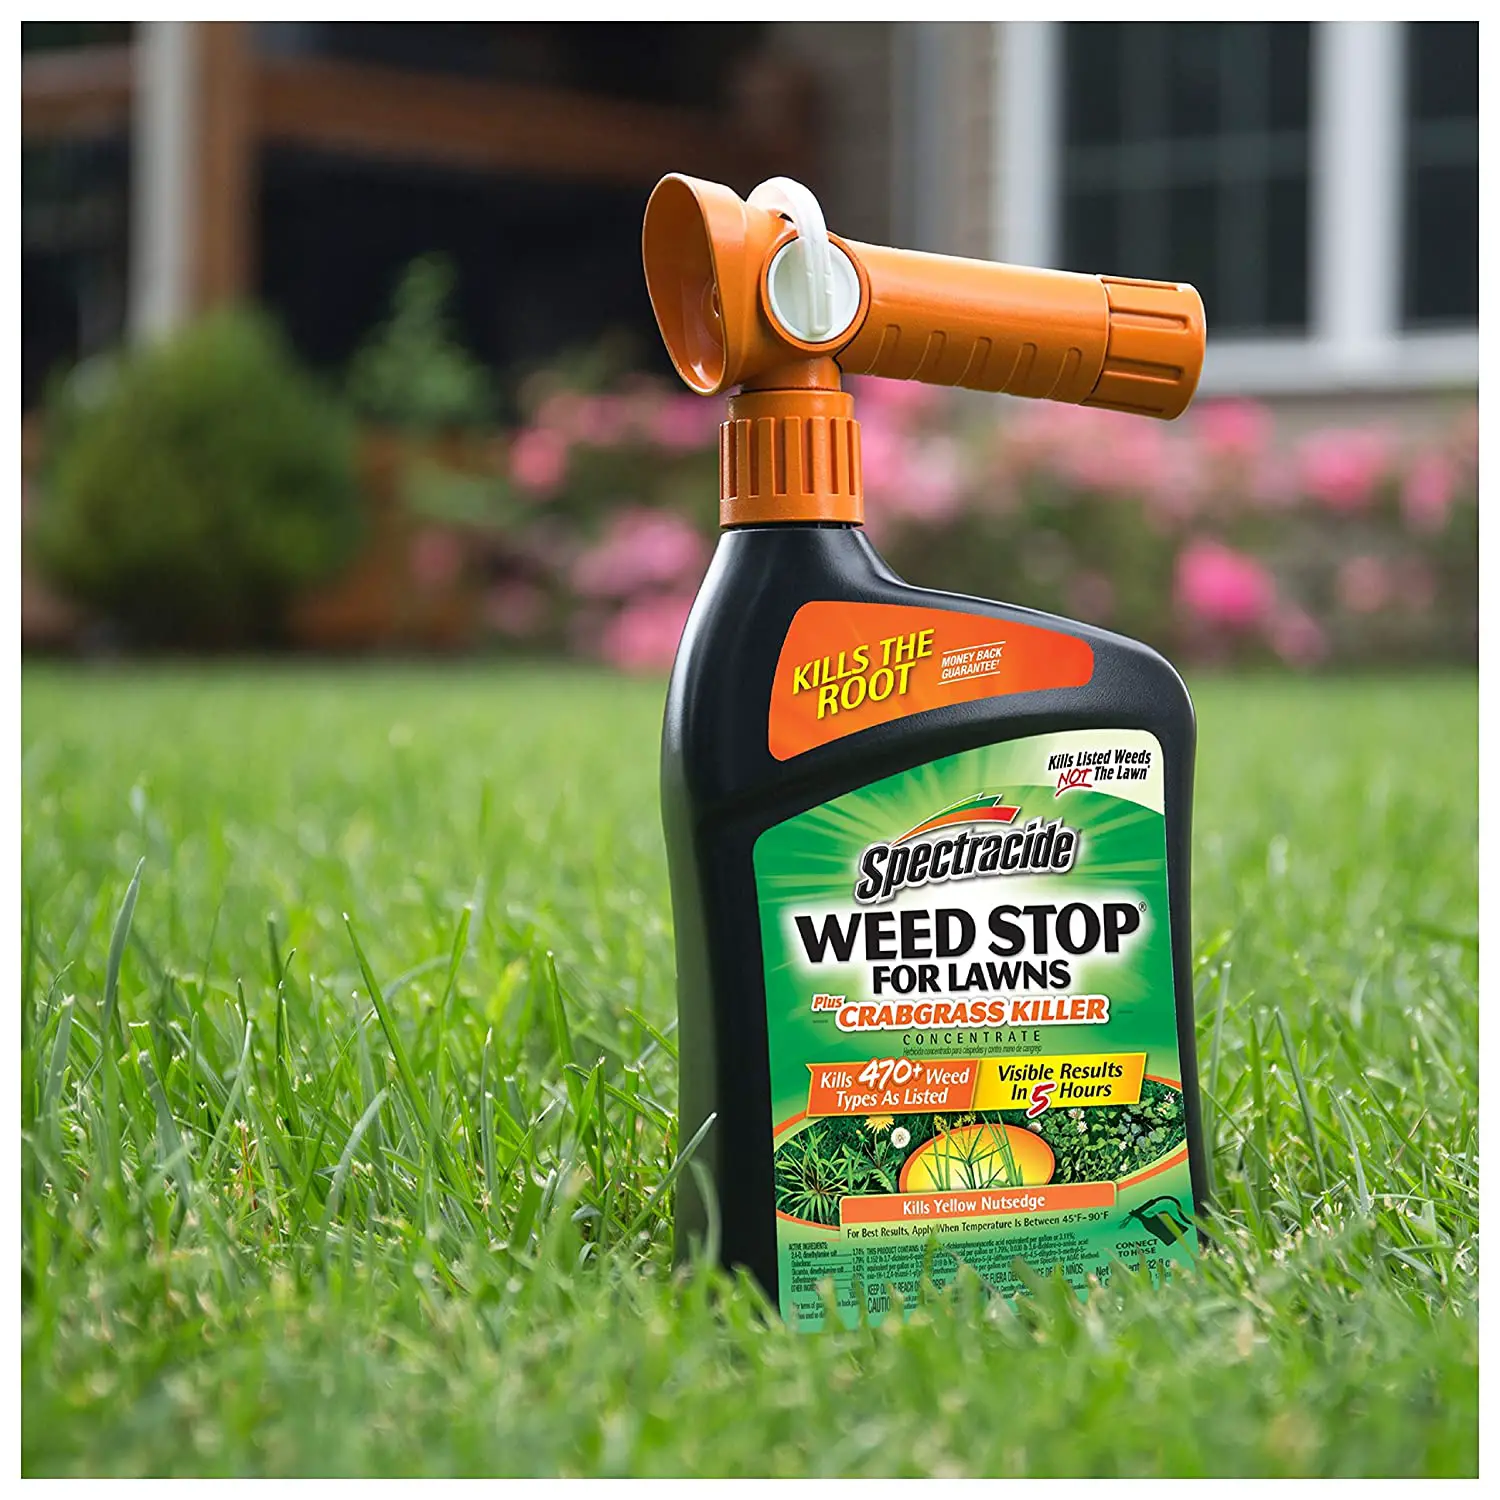 Weed Stop For Lawns Plus Crabgrass Killer Concentrate, Ready